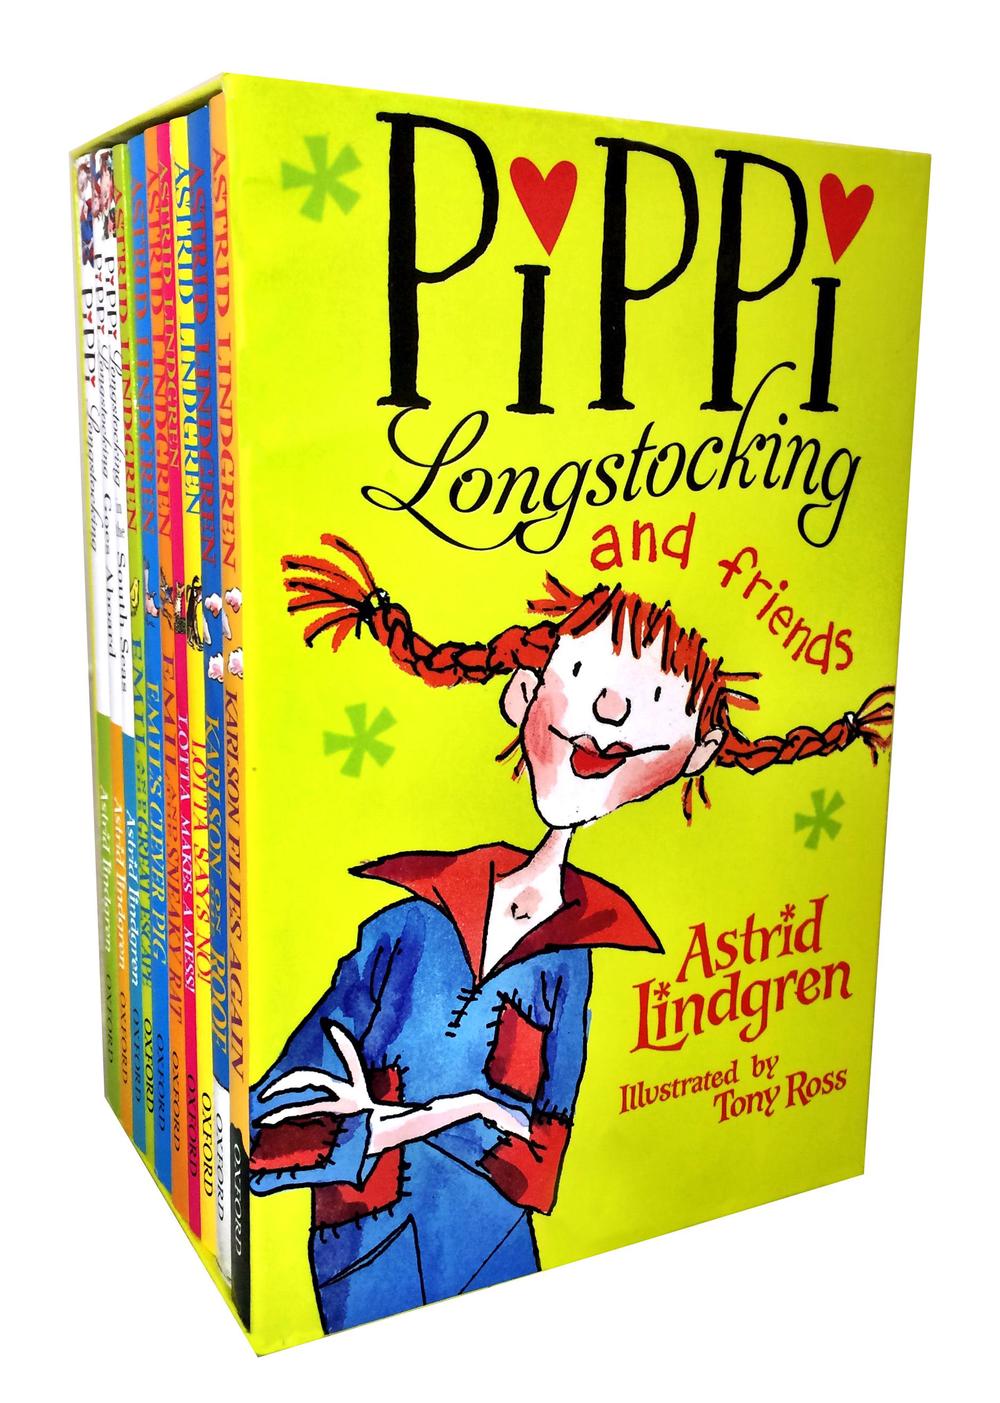 Pippi Longstocking Collection by Astrid Lindgren, 9780192746252 | Buy